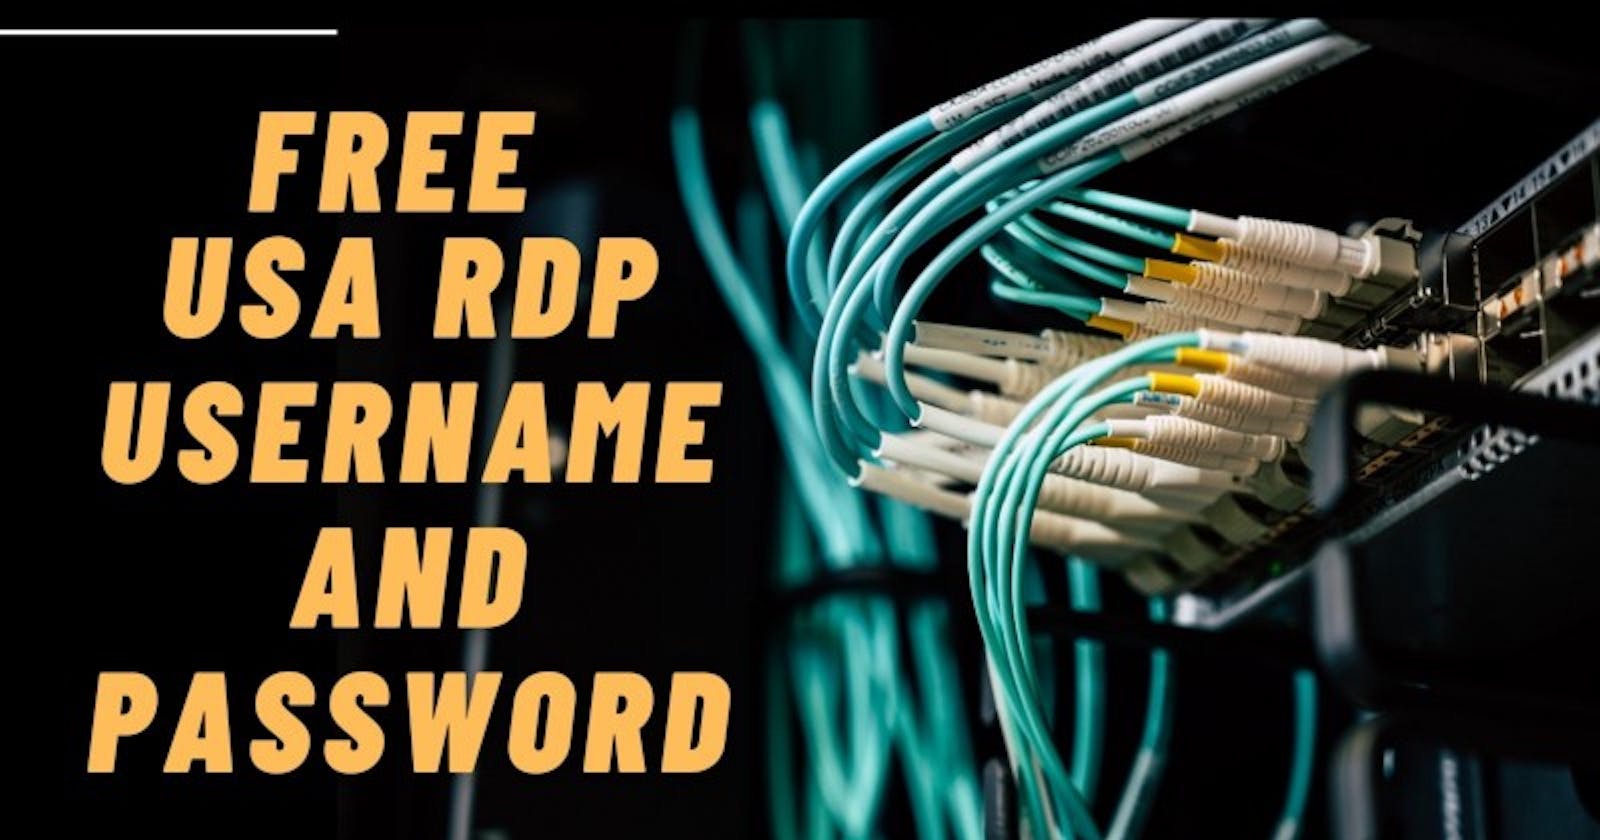 How to Get 100% Free RDP Account (Free USA RDP Username and Password)